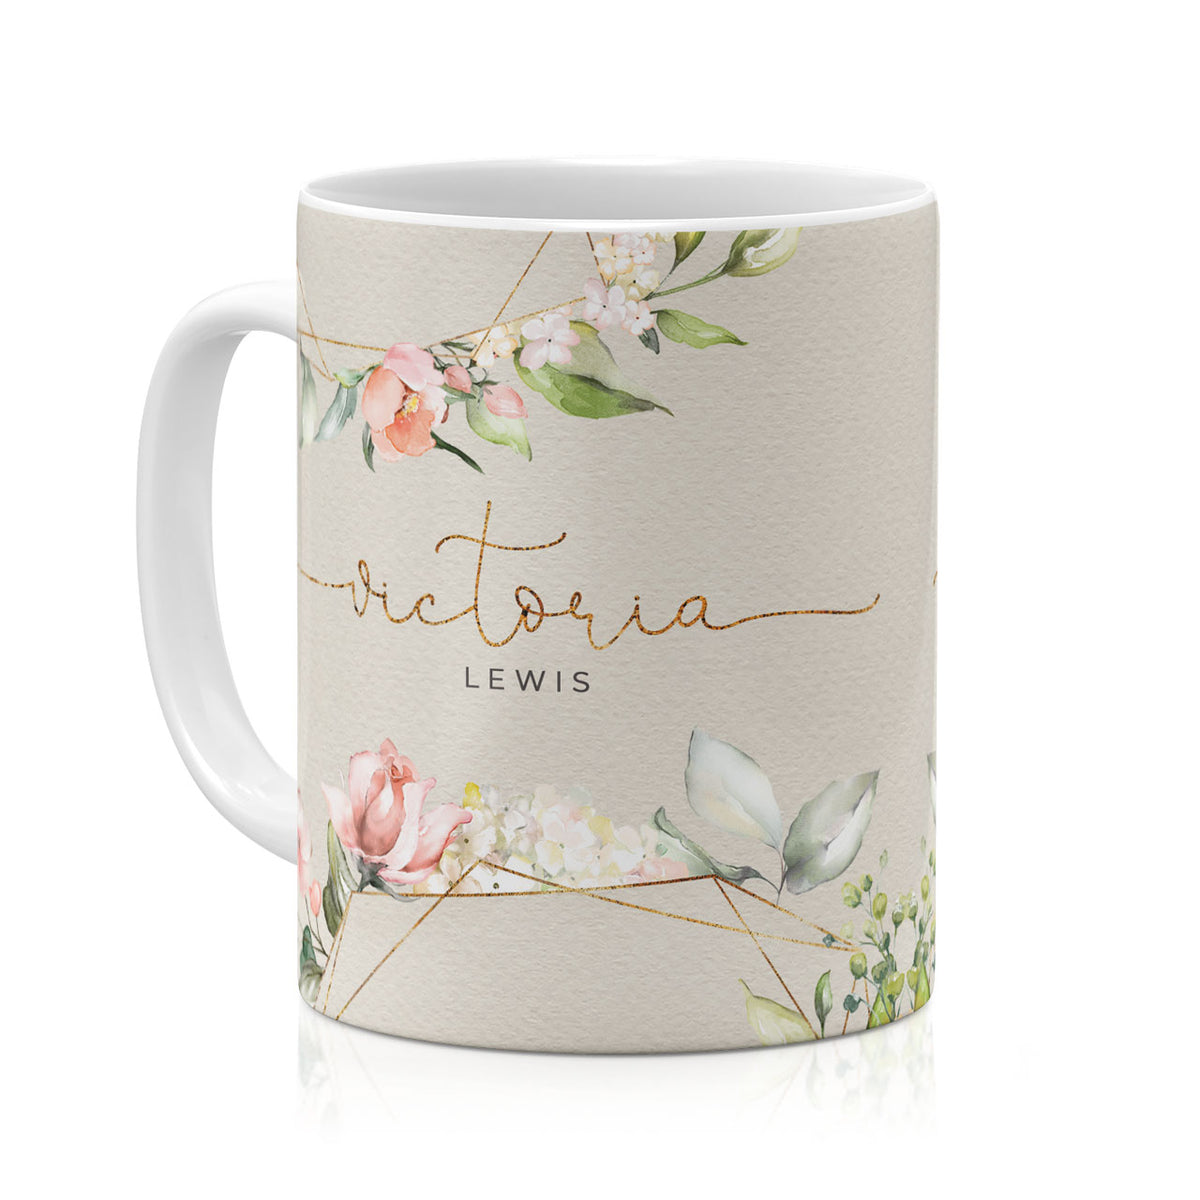 Personalised Ceramic Mug with Name Initials Text Floral Pink Flowers Rose Buds Watercolour